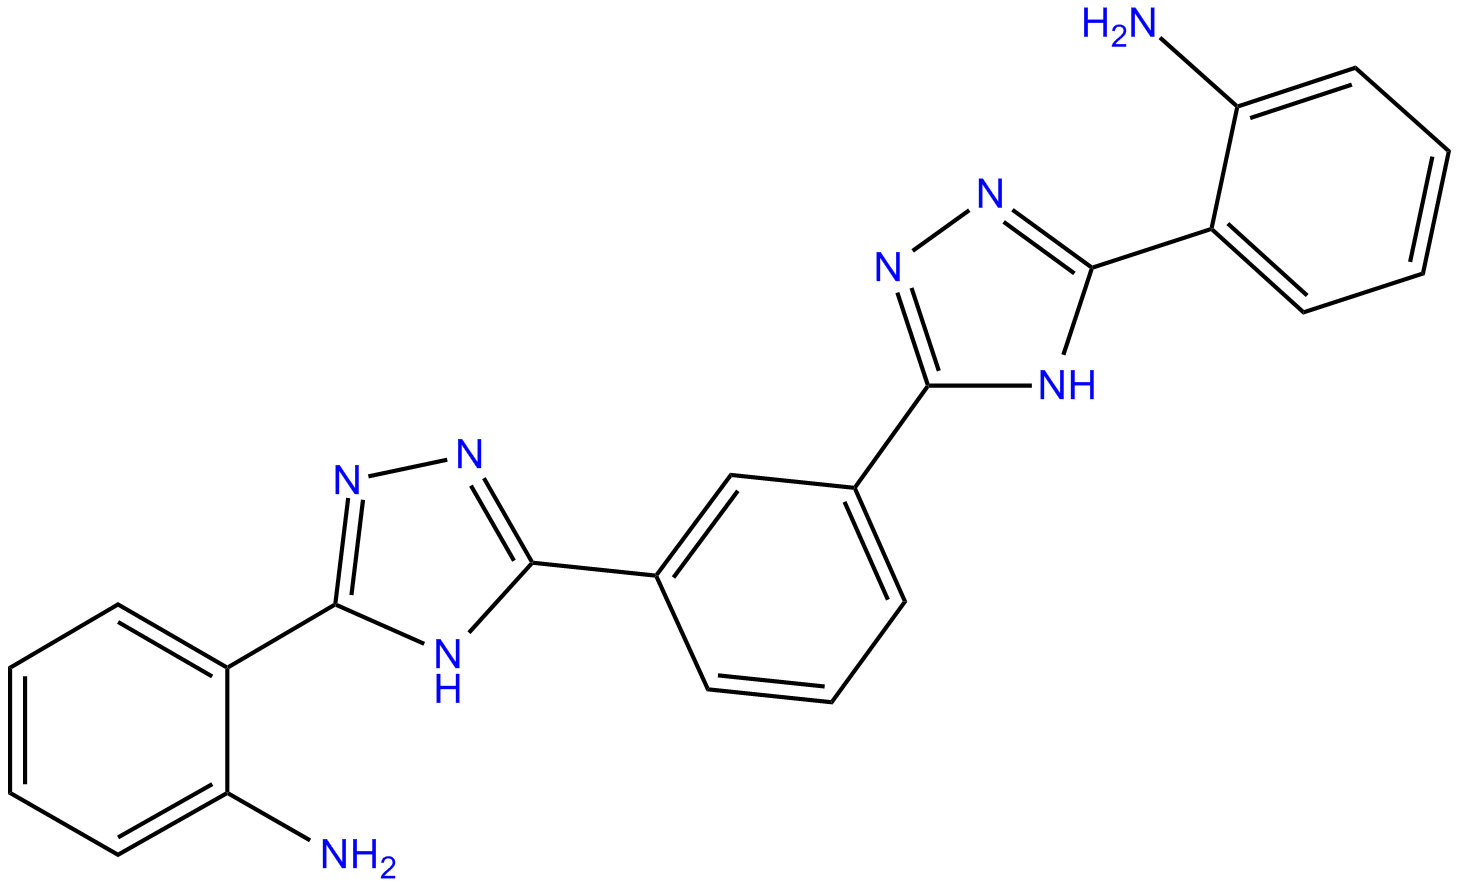 Image of 1,3-bis[5-(o-aminophenyl)-1,2,4-trizaole-3-yl]benzene